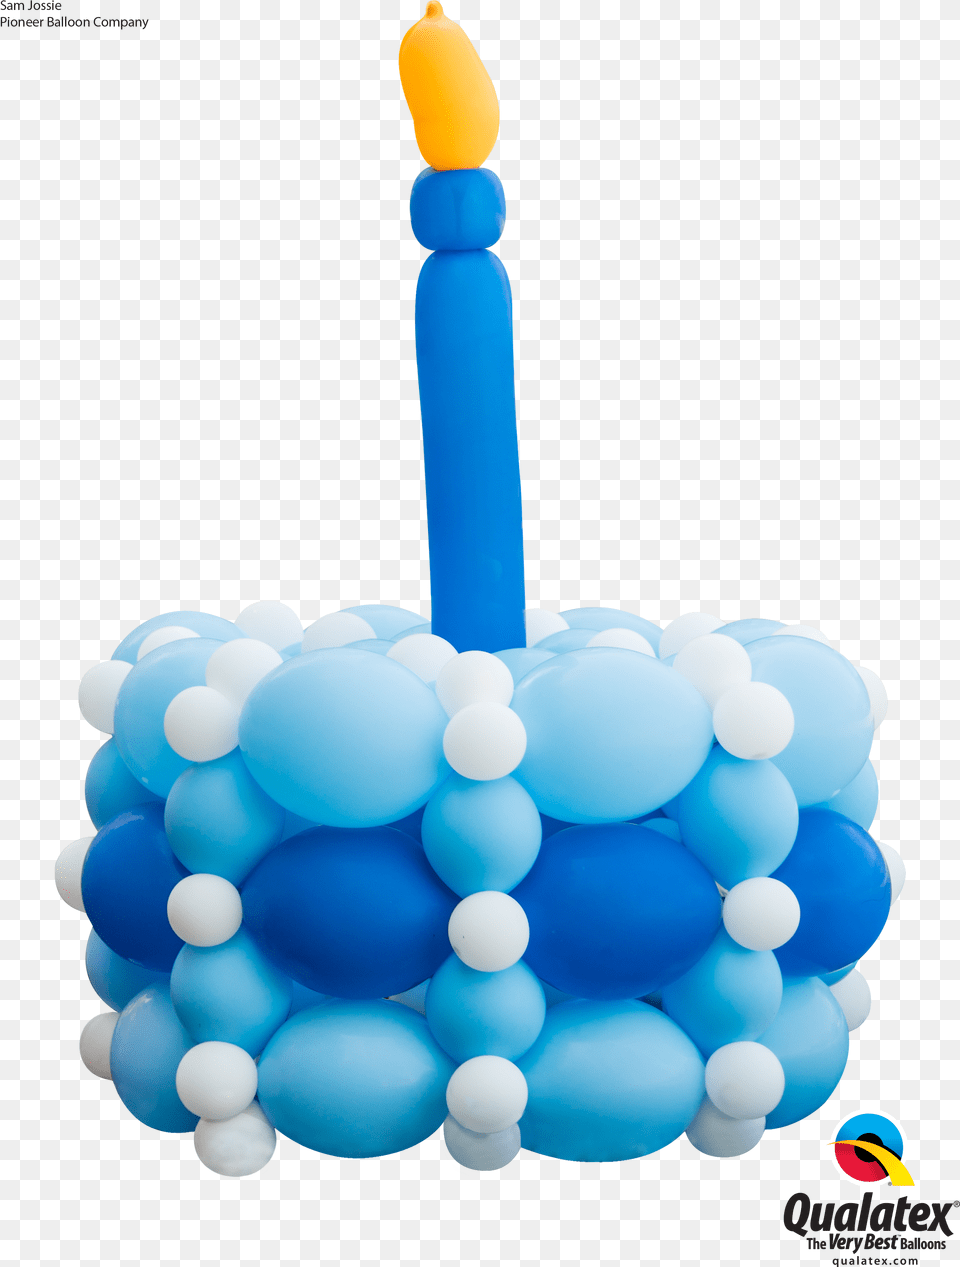 First Birthday Cake Balloon Decorations 15cm Qualatex Quick Link Balloons Assorted Colours, Candle, Birthday Cake, Cream, Dessert Png Image